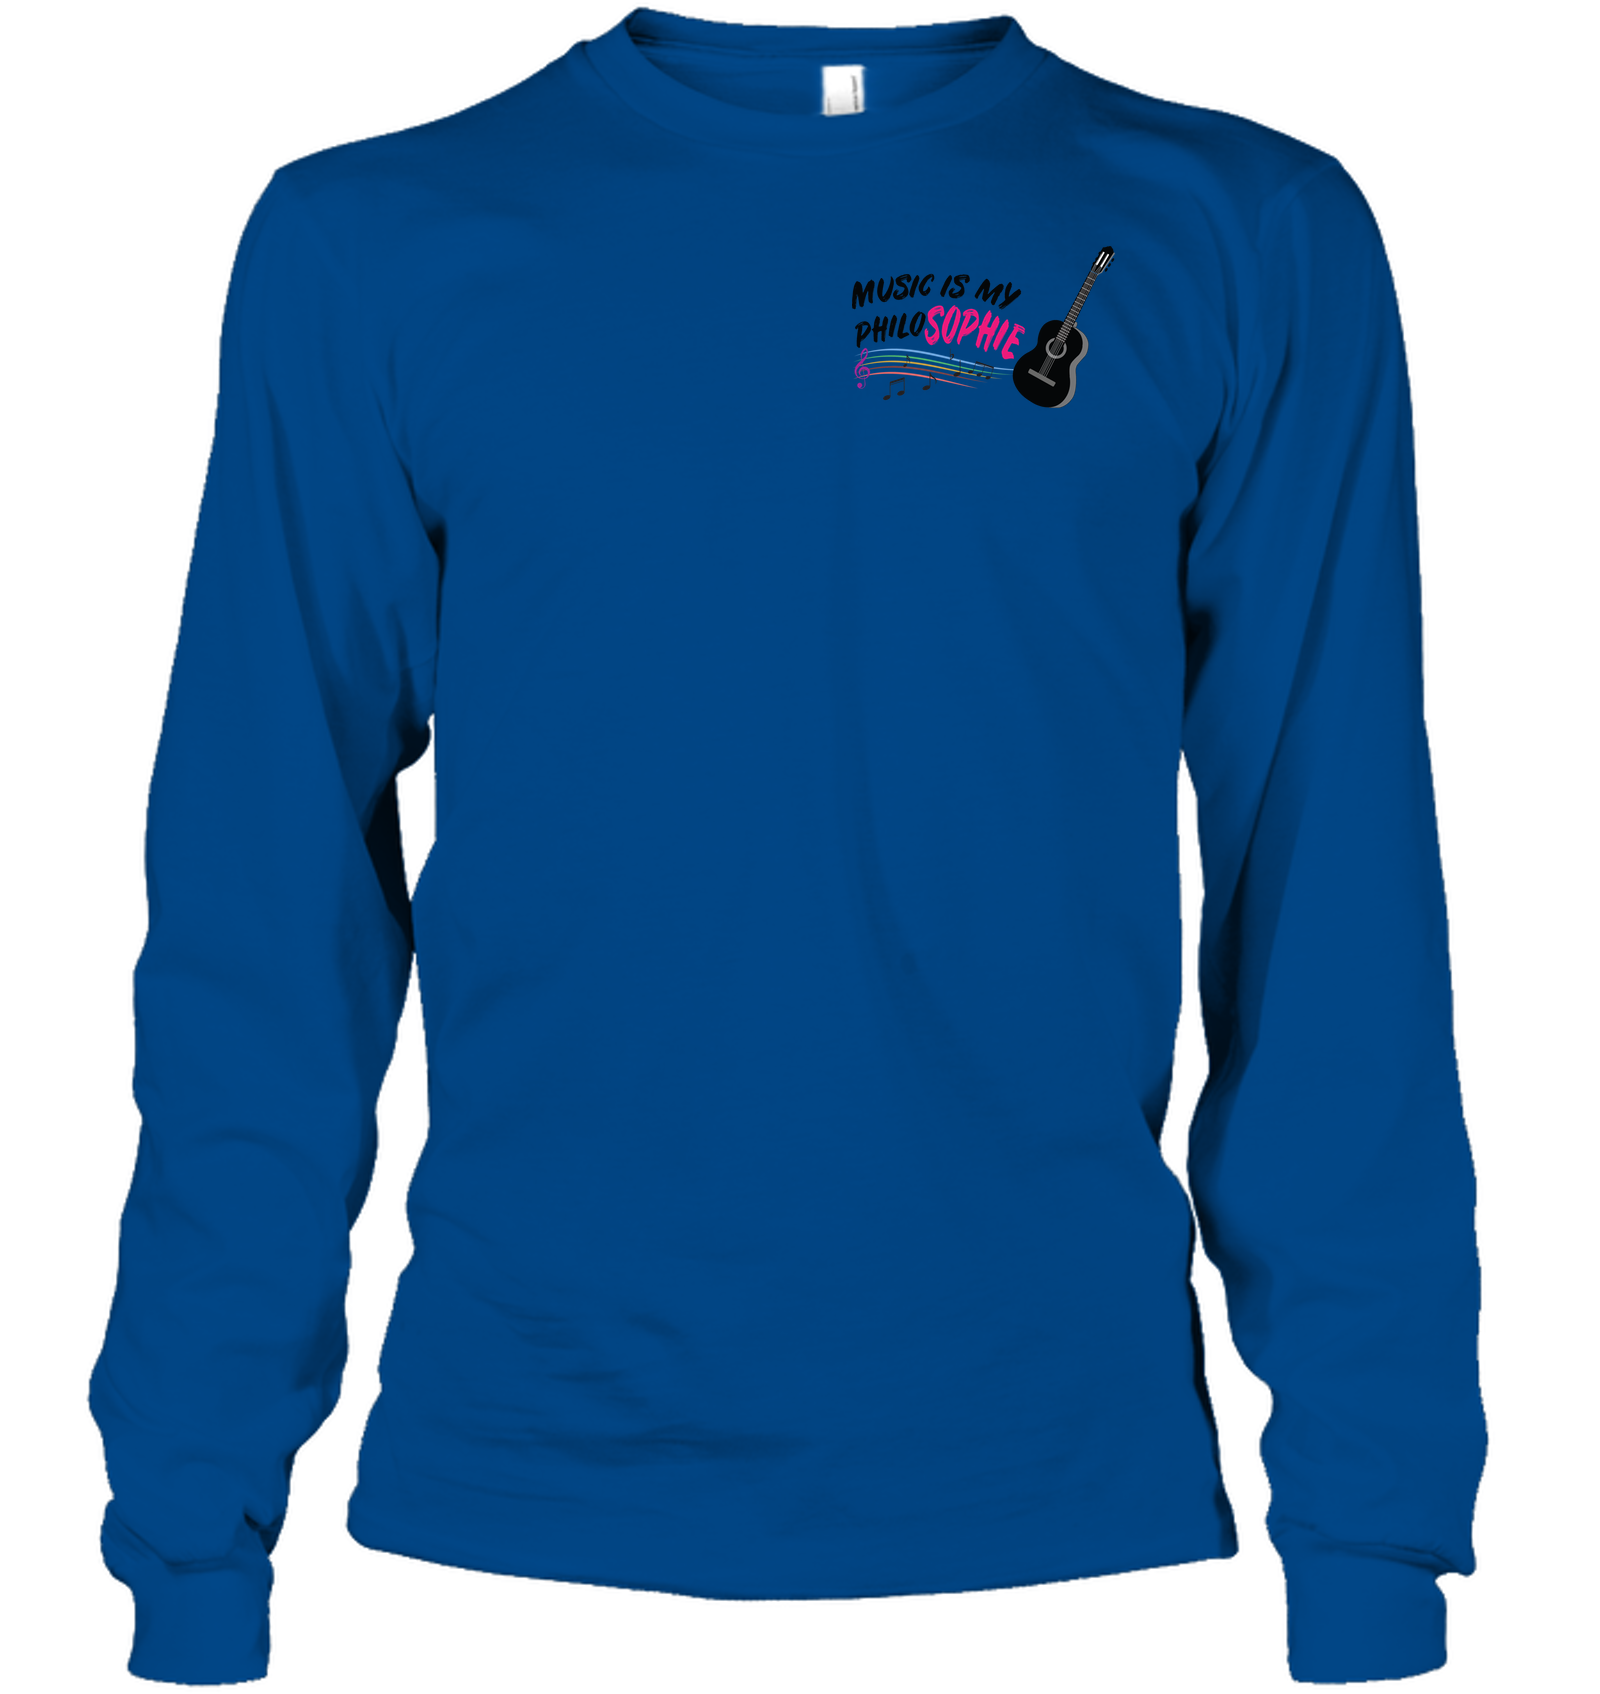 Music is my Philo-Sophie Colorful + Guitar (Pocket Size) - Gildan Adult Classic Long Sleeve T-Shirt